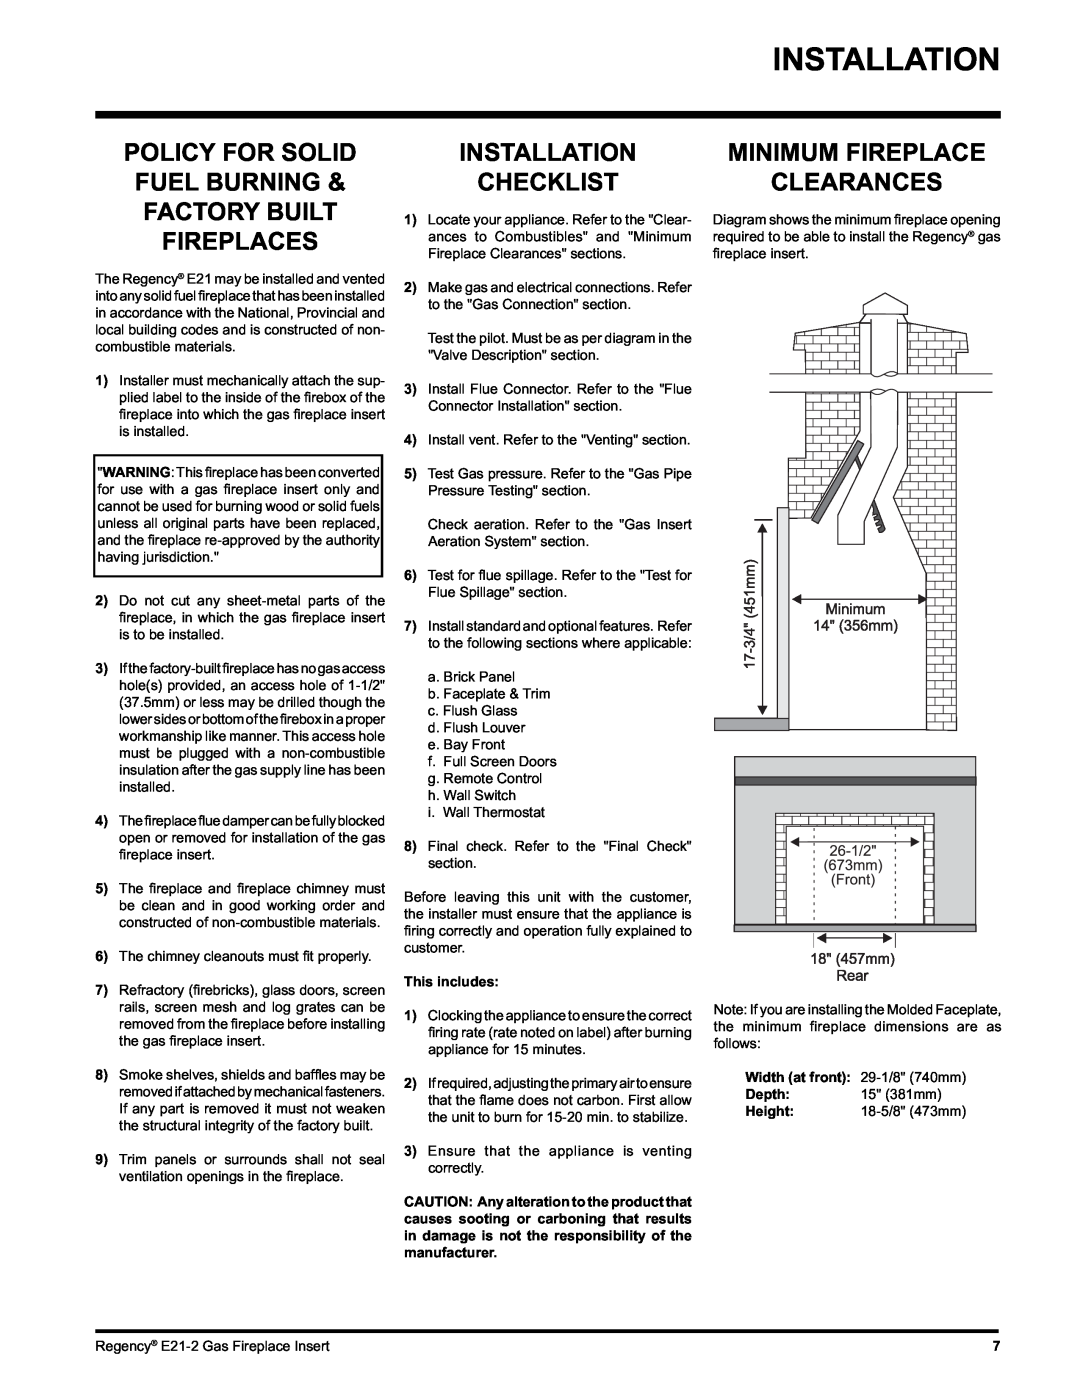 Regency E21-NG2 Installation Checklist, Minimum Fireplace Clearances, This includes, Width at front, Depth, Height 